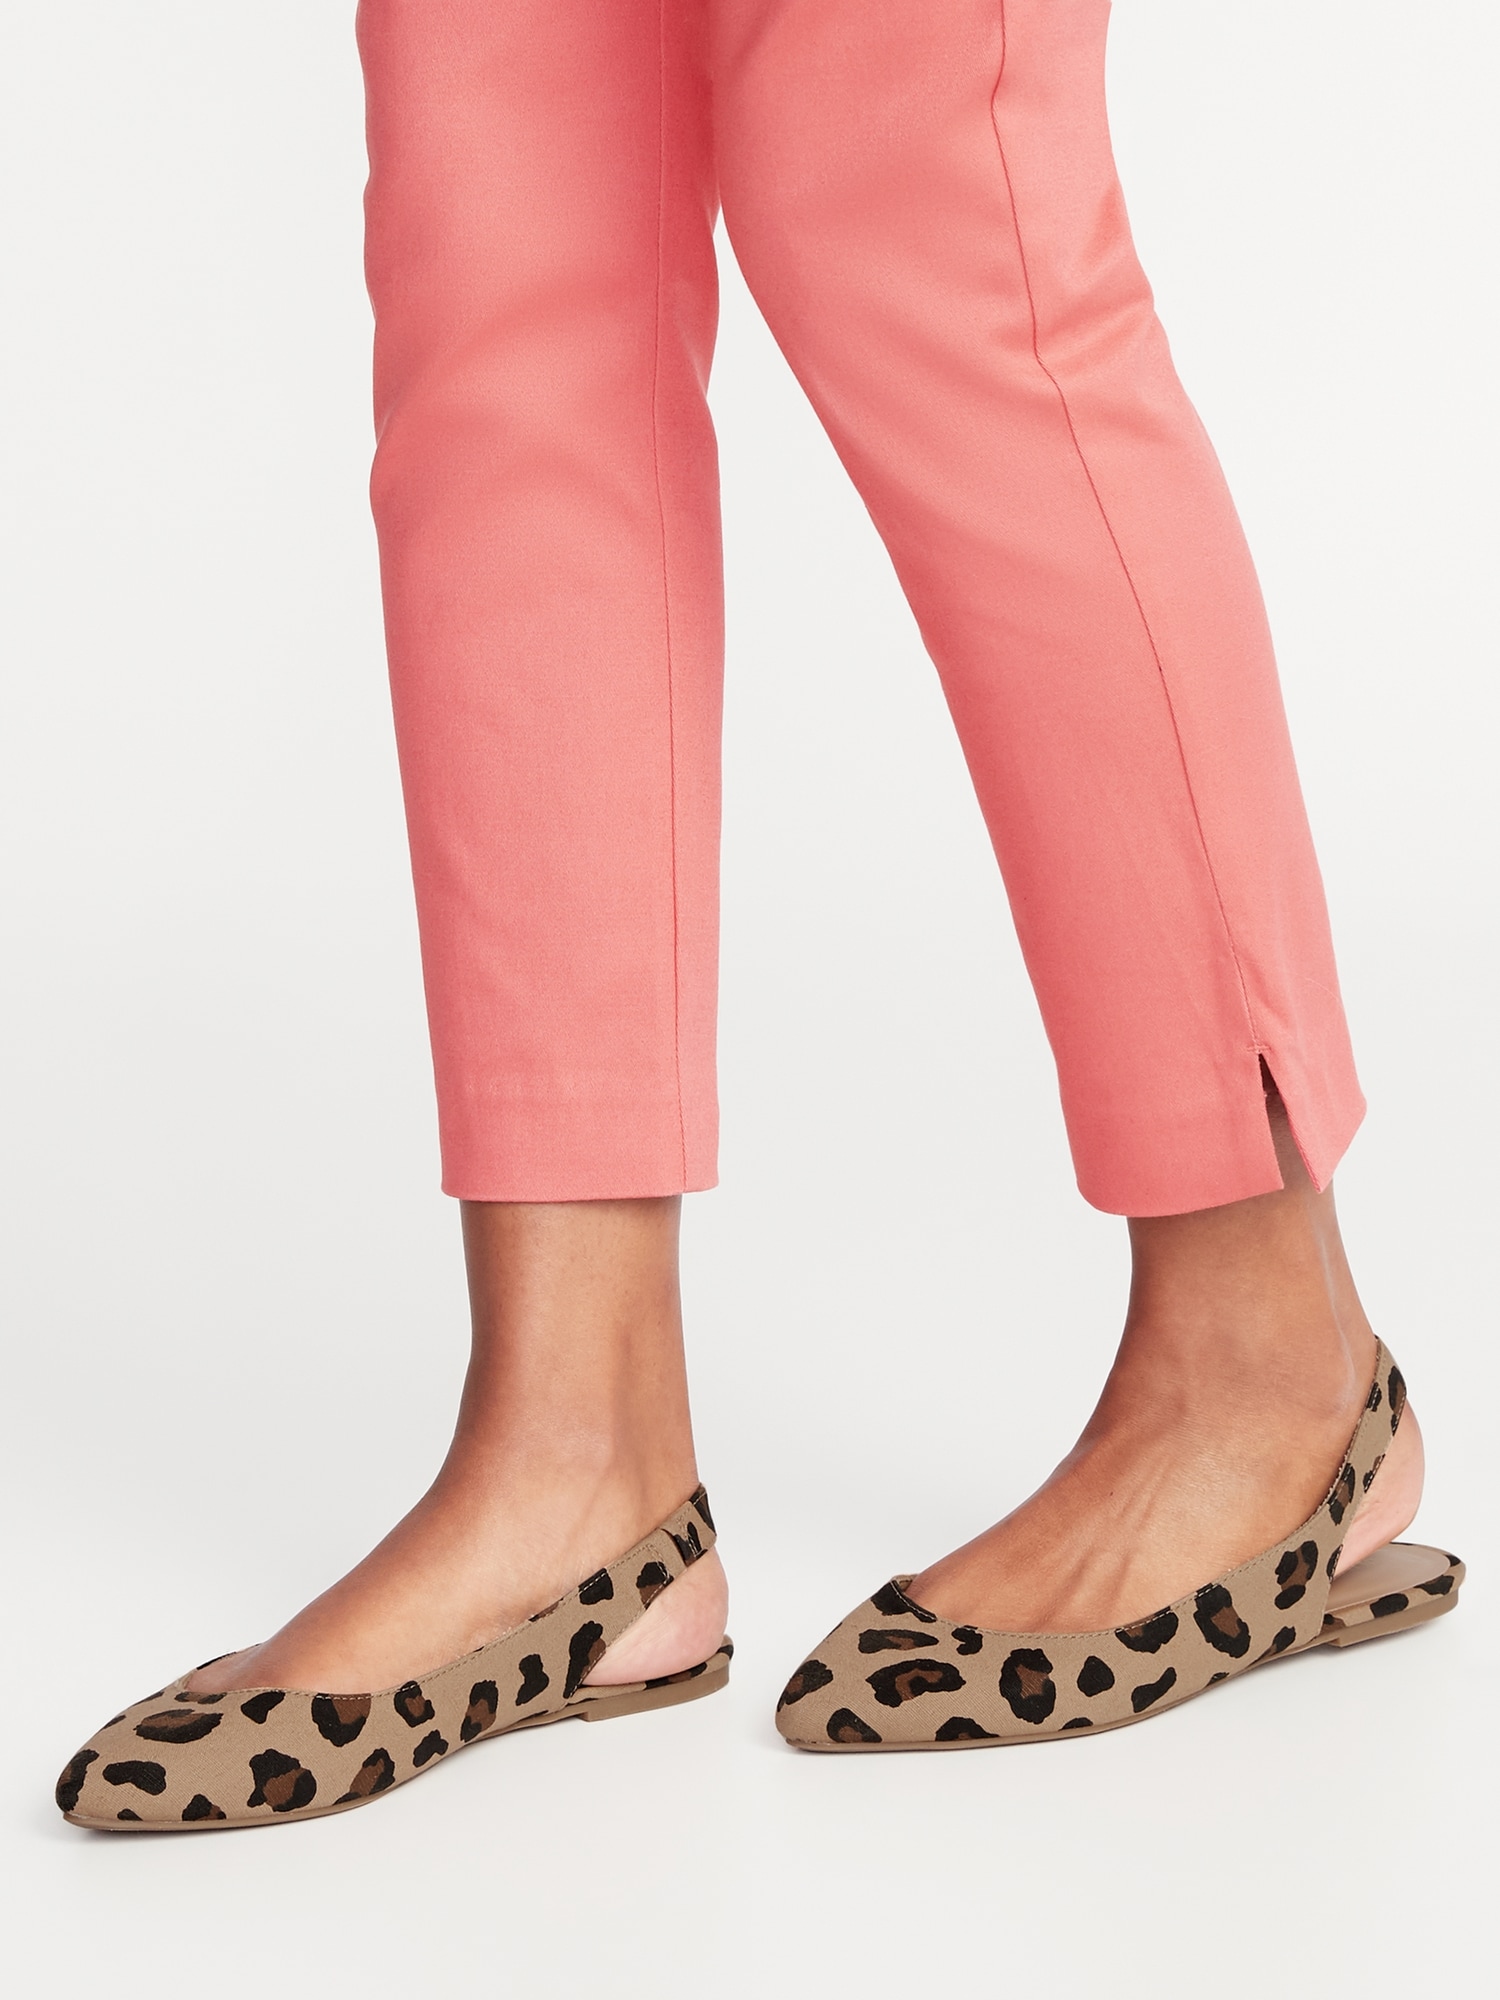 old navy leopard flats